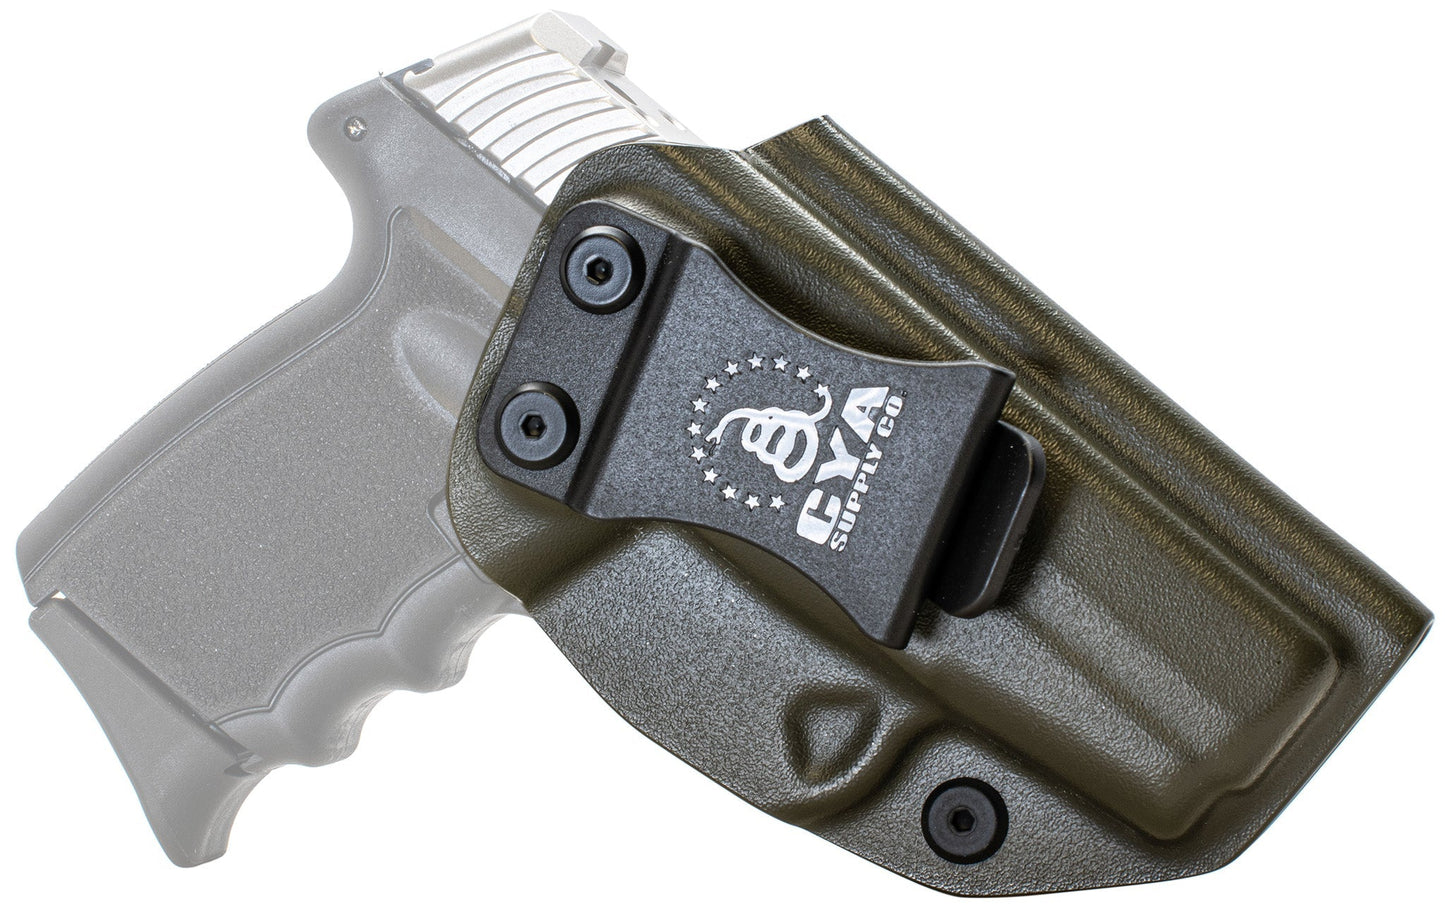 SCCY CPX-1 Holster CYA Supply Co.